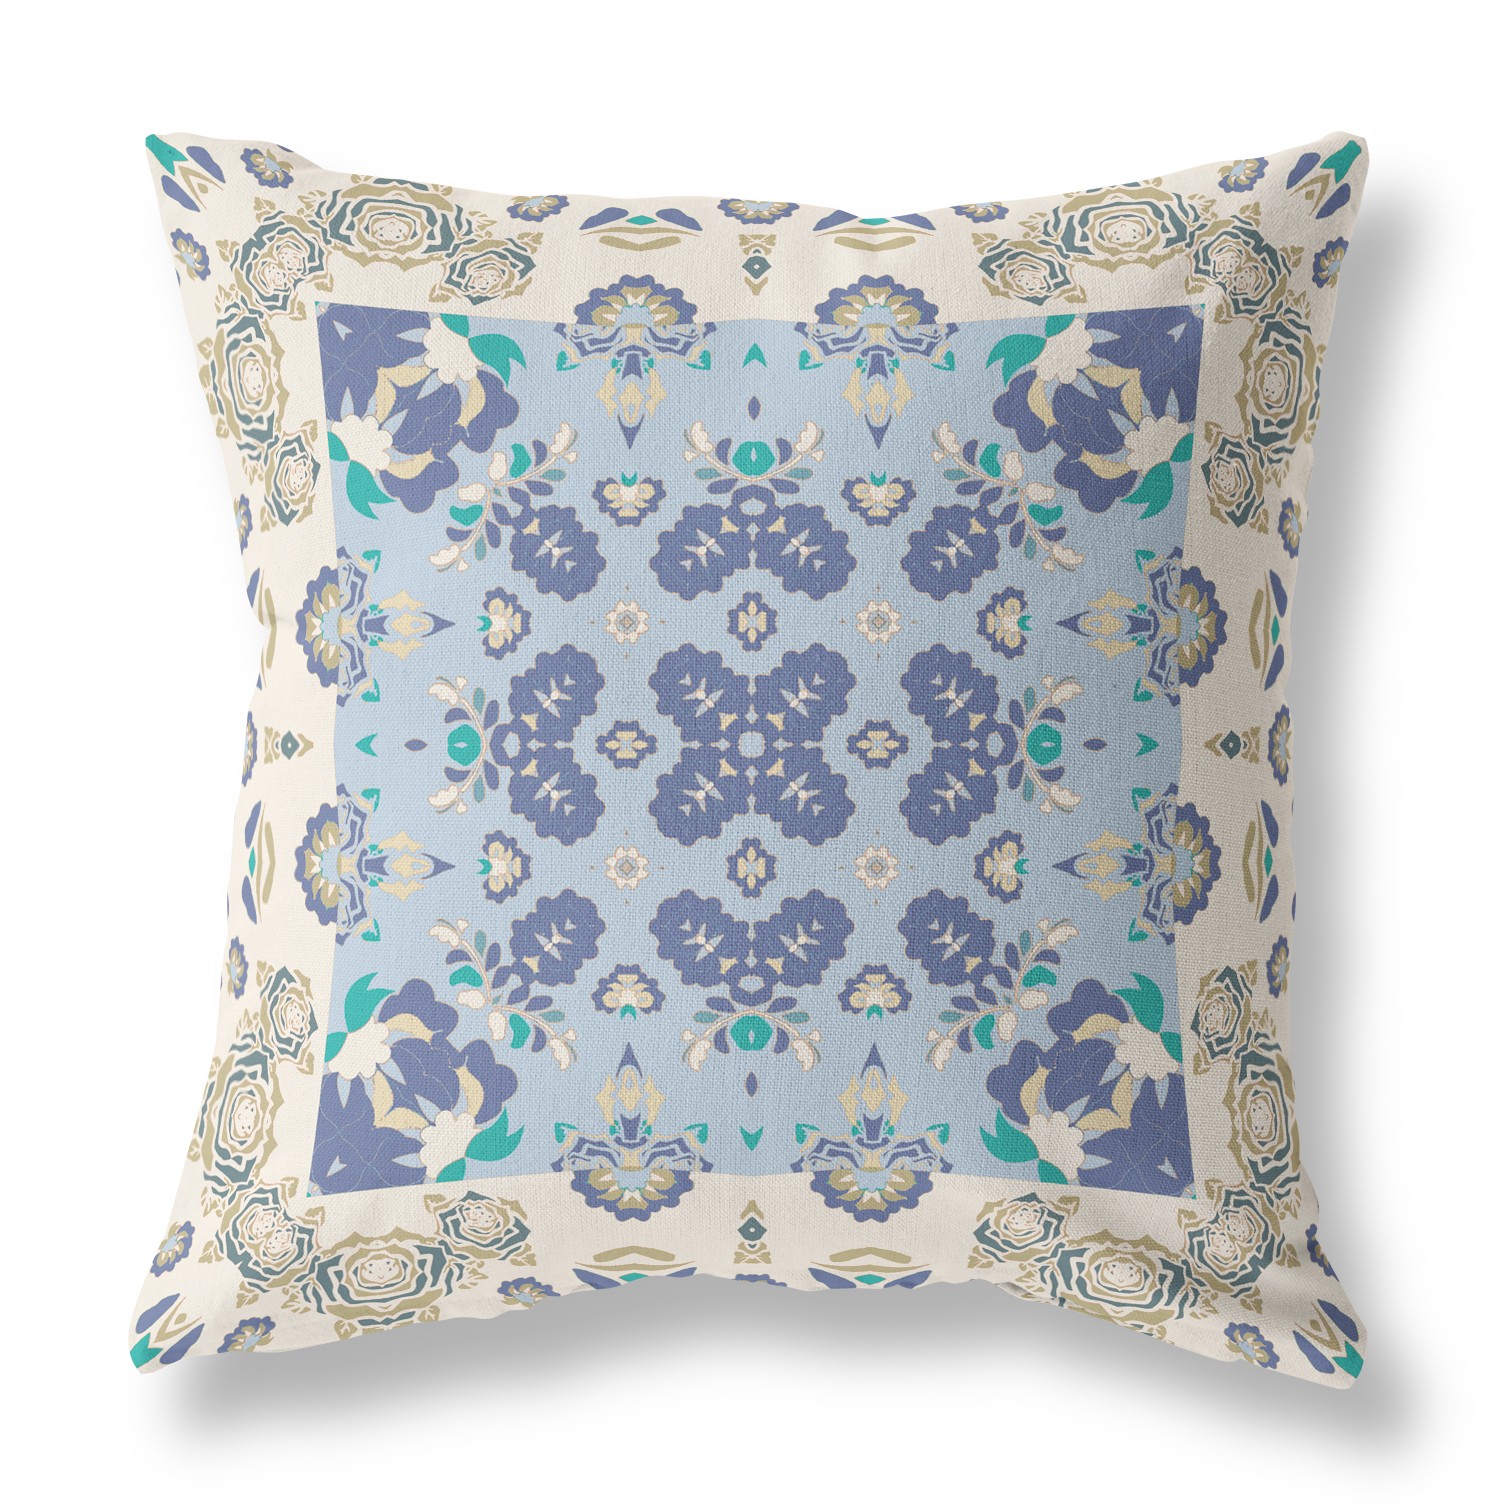 20” White Blue Rose Box Indoor Outdoor Zippered Throw Pillow-411137-1